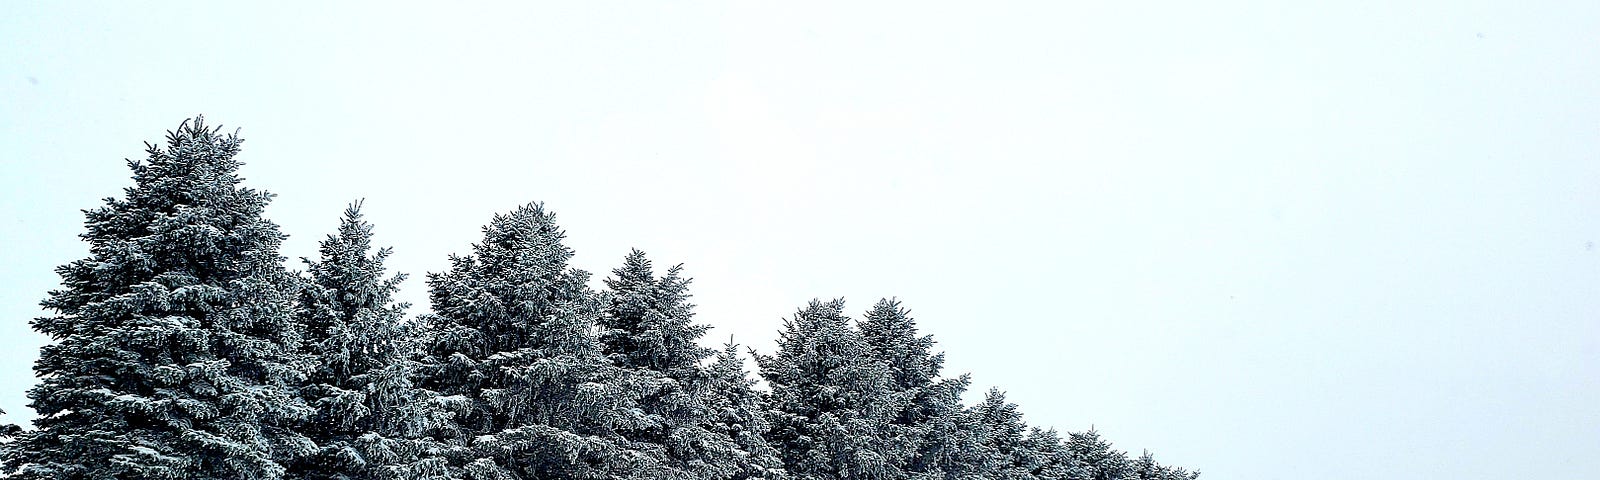 A row of snow-covered evergreen trees.